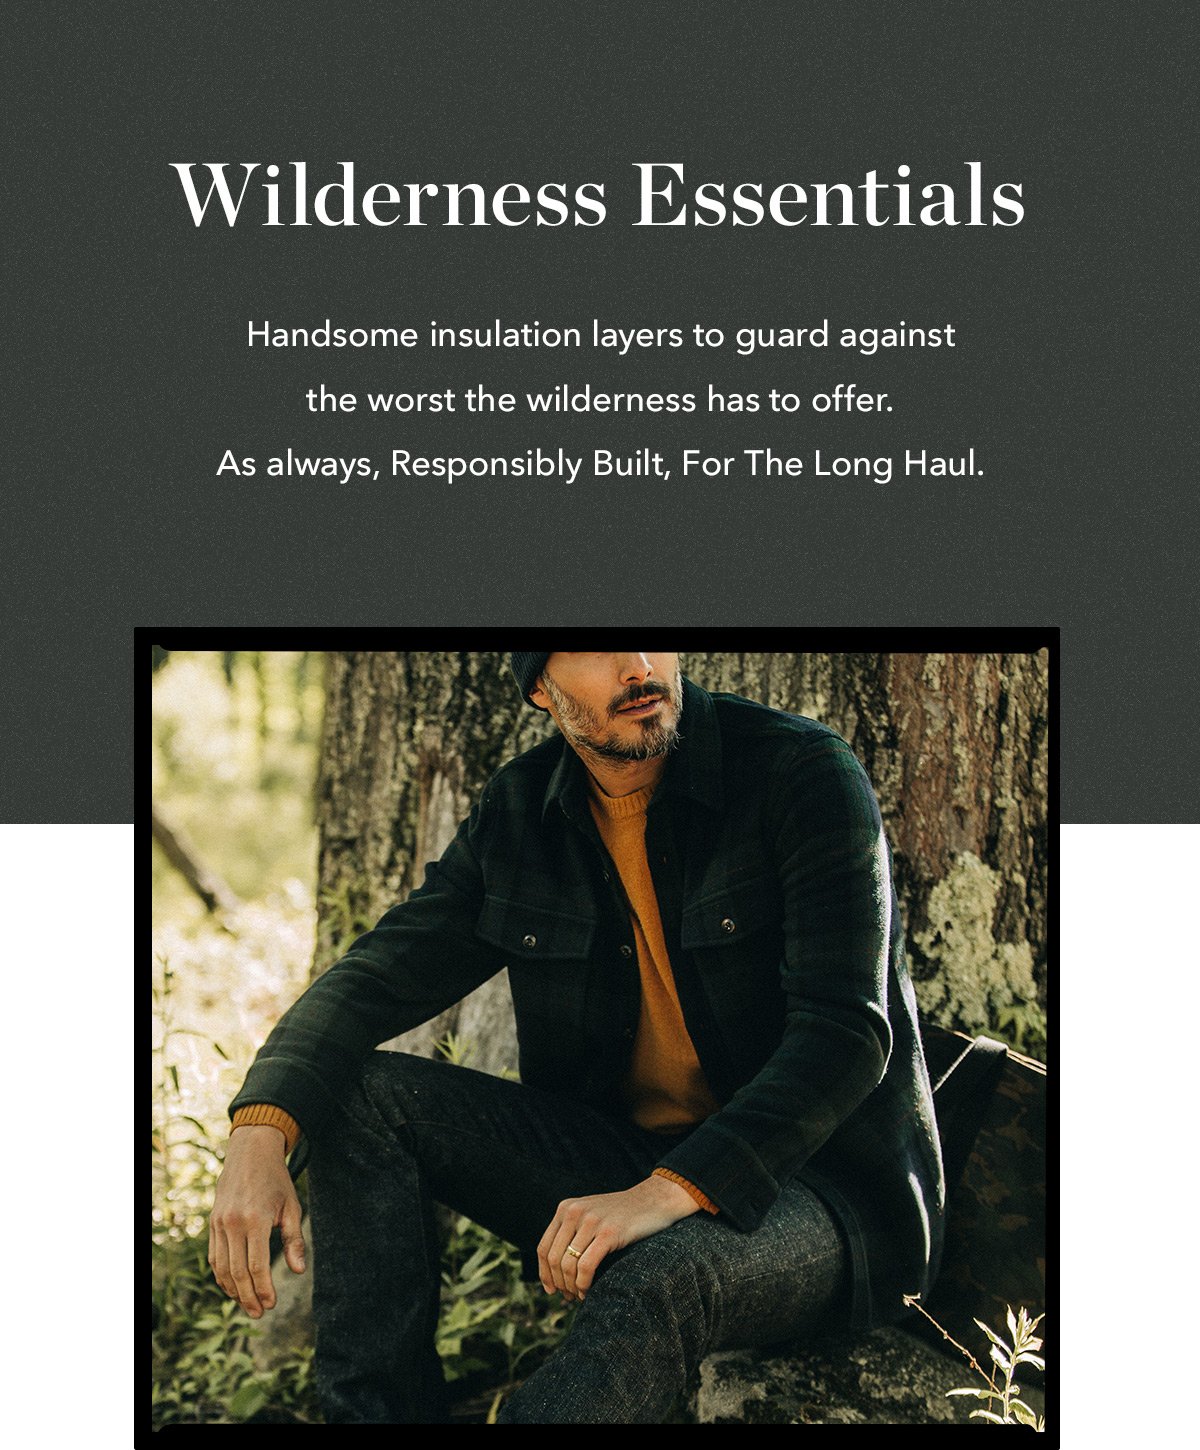 Wilderness Essentials: Handsome insulation layers to guard against the worst the wilderness has to offer. As always, Responsibly Built, For The Long Haul